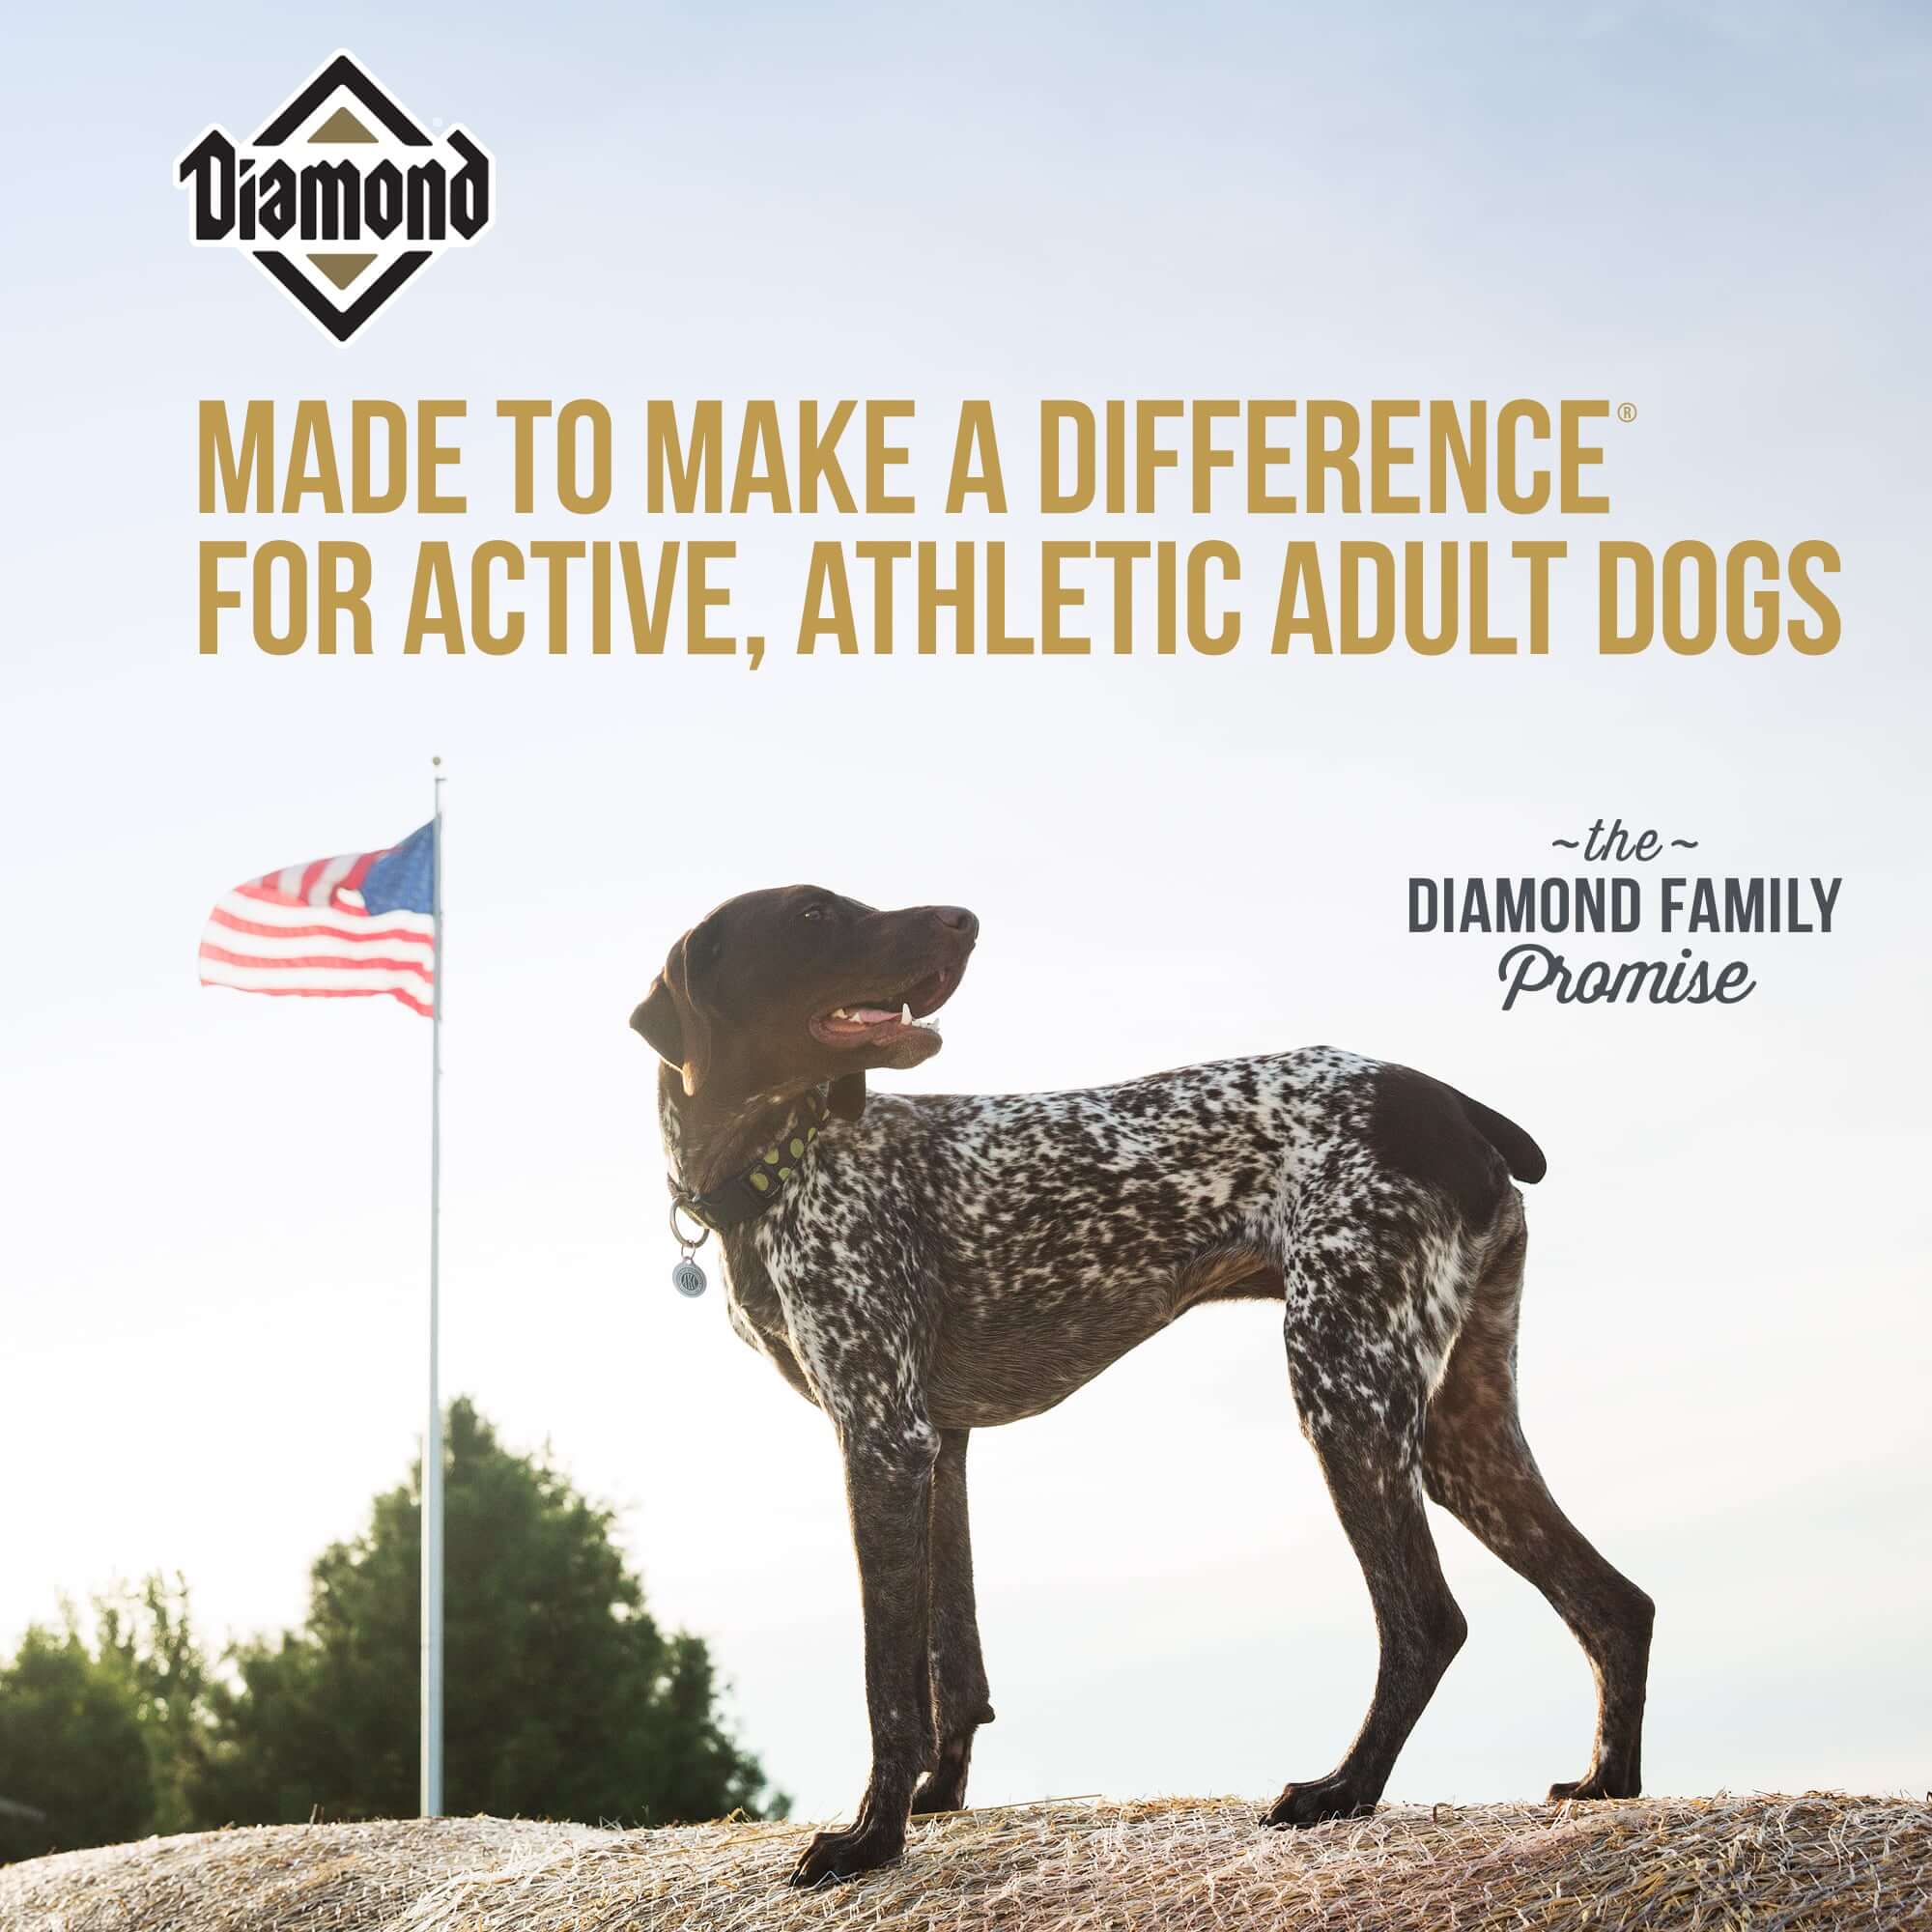 Diamond Made to make a difference for highly active sporting dogs